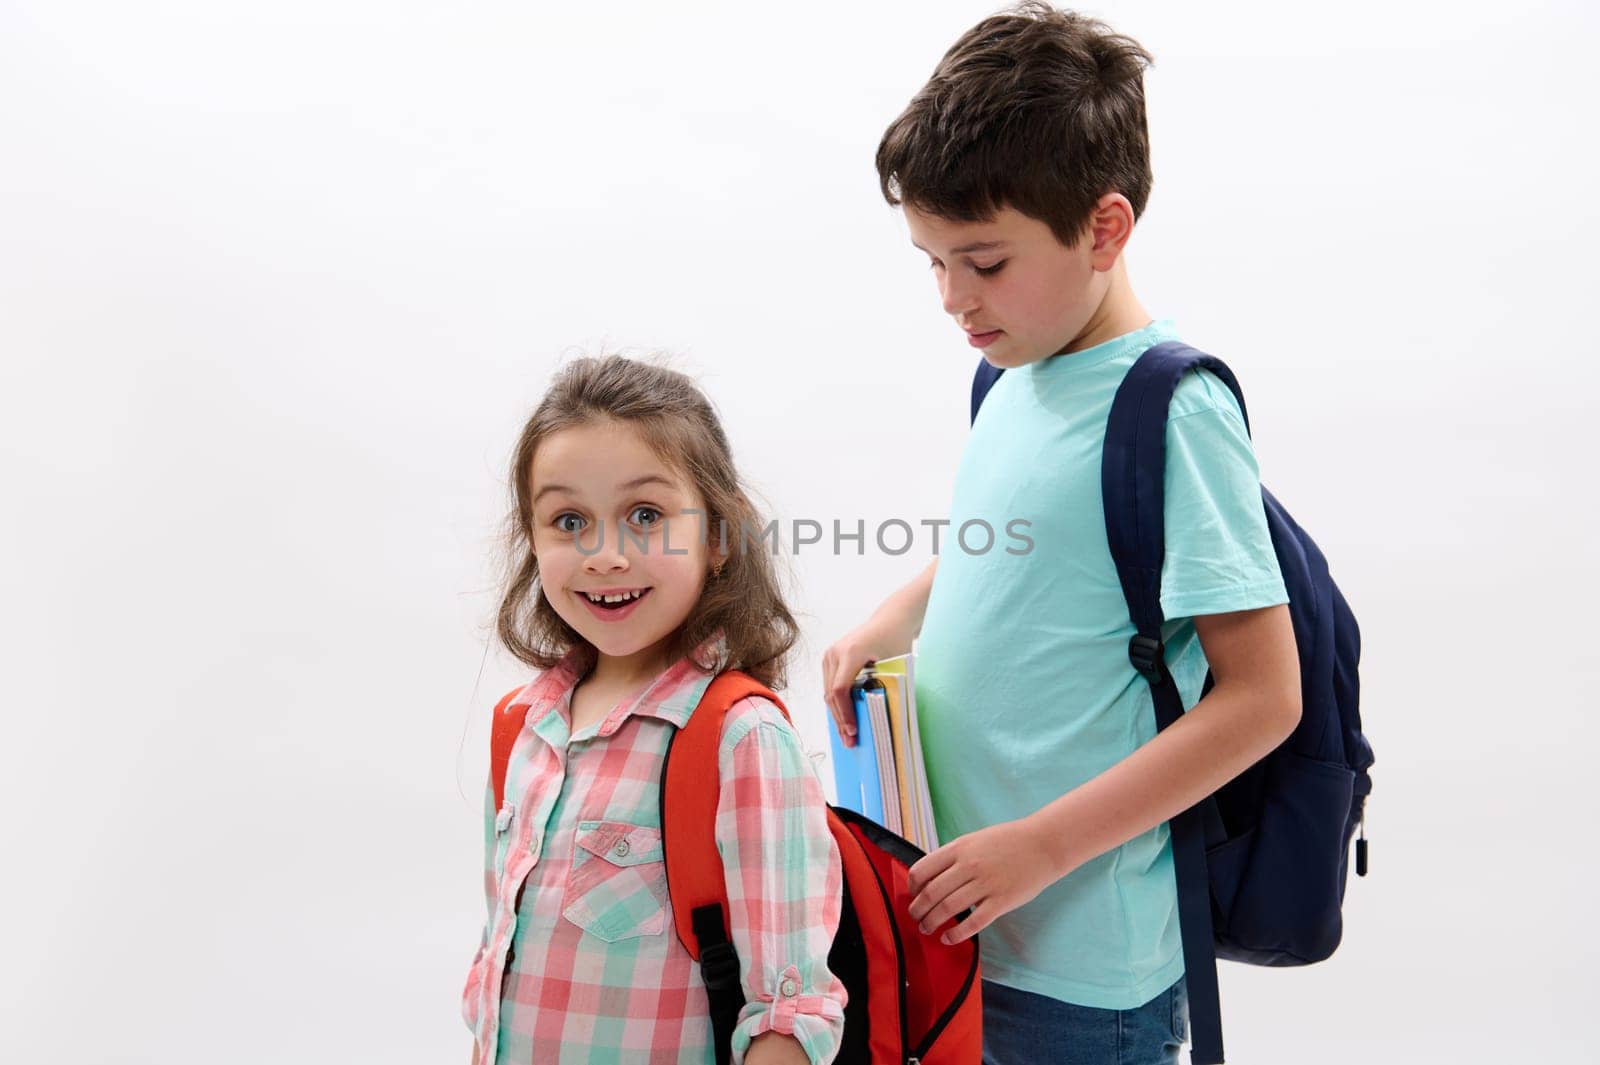 Lovely kid girl makes faces looking at camera while her brother puts workbooks inside her backpack over white background by artgf